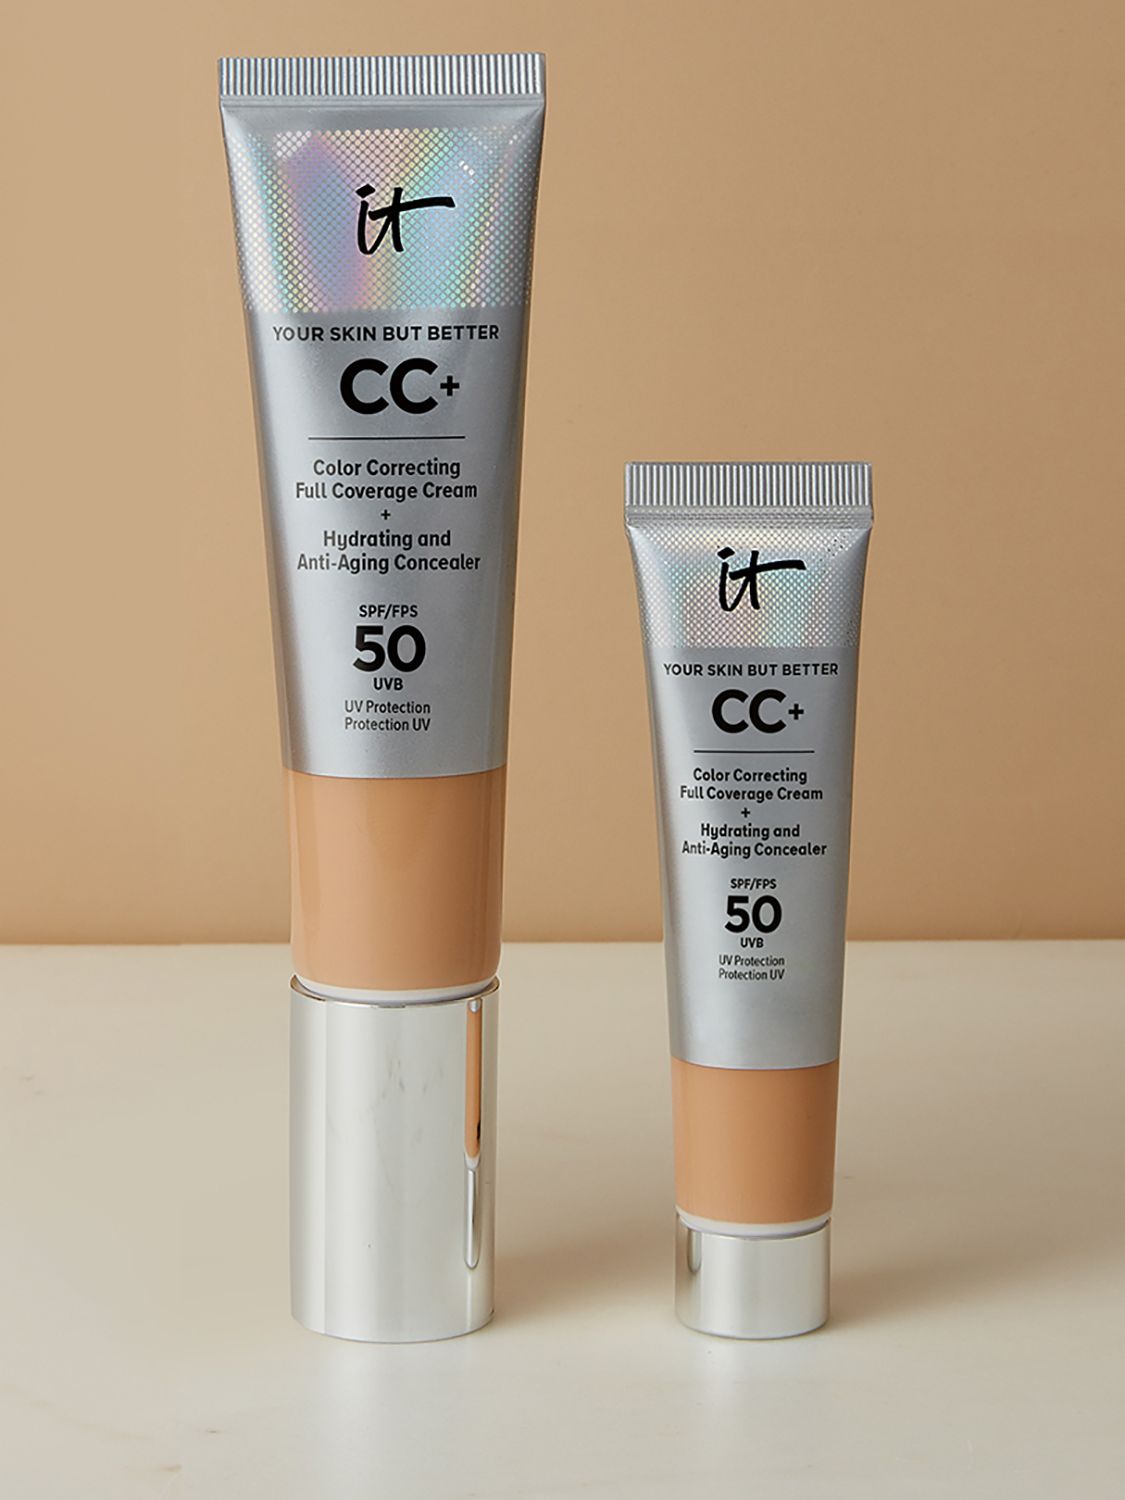 IT Cosmetics Your Skin But Better CC+ Cream with SPF 50 Travel Size, Light 5